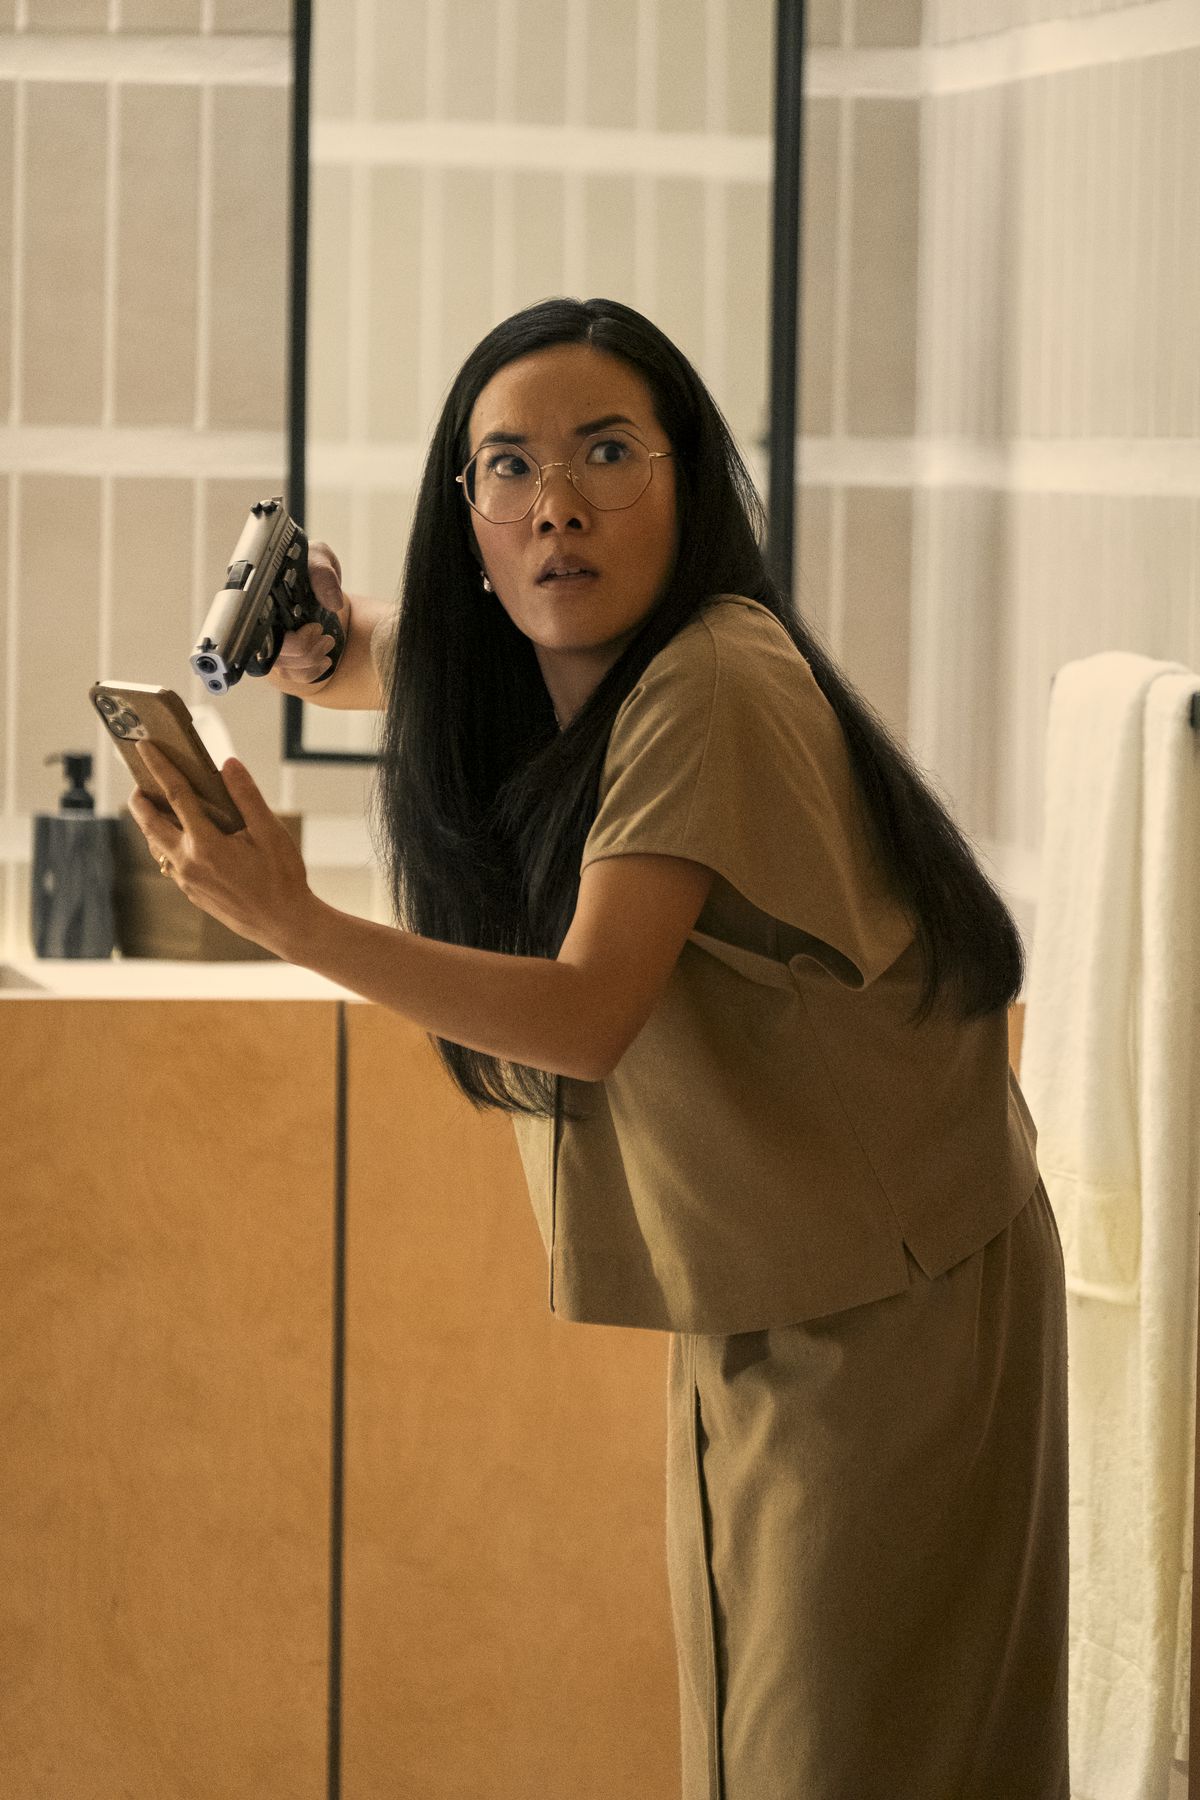 Amy (Ali Wong) holding a gun at a phone in her hand and looking shocked at something off-camera